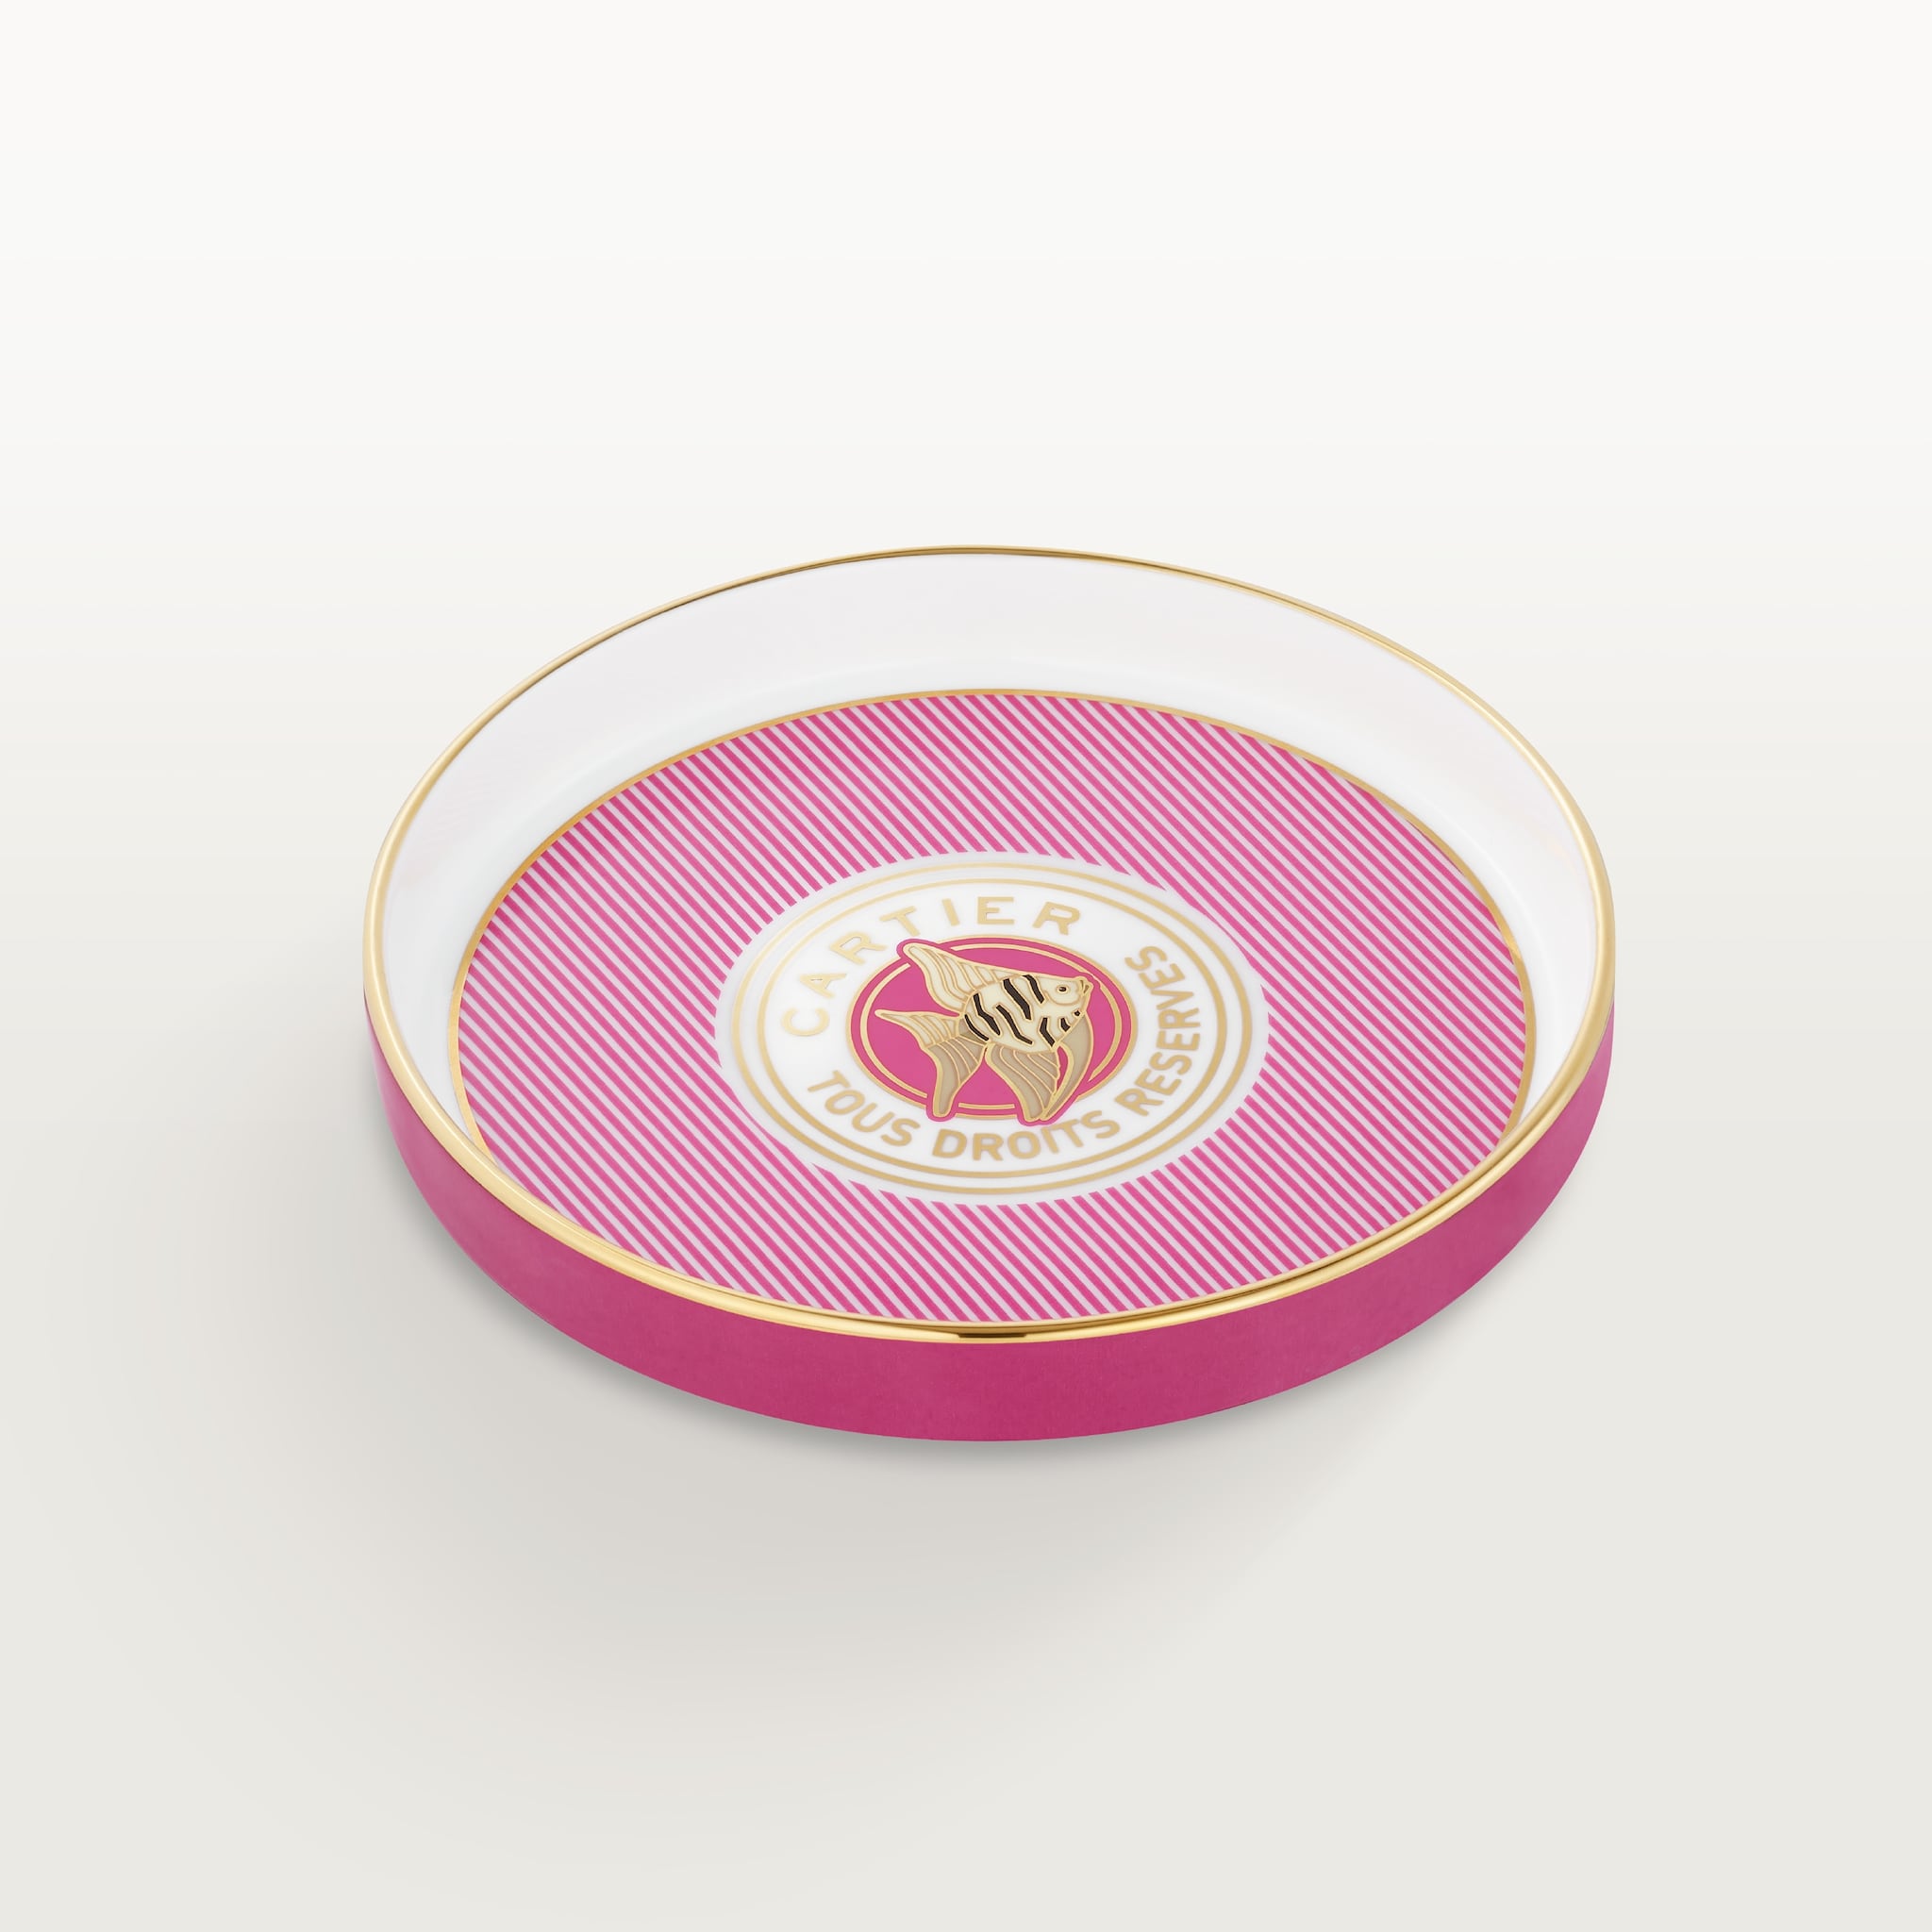 Cartier Characters round tray, small modelPorcelain